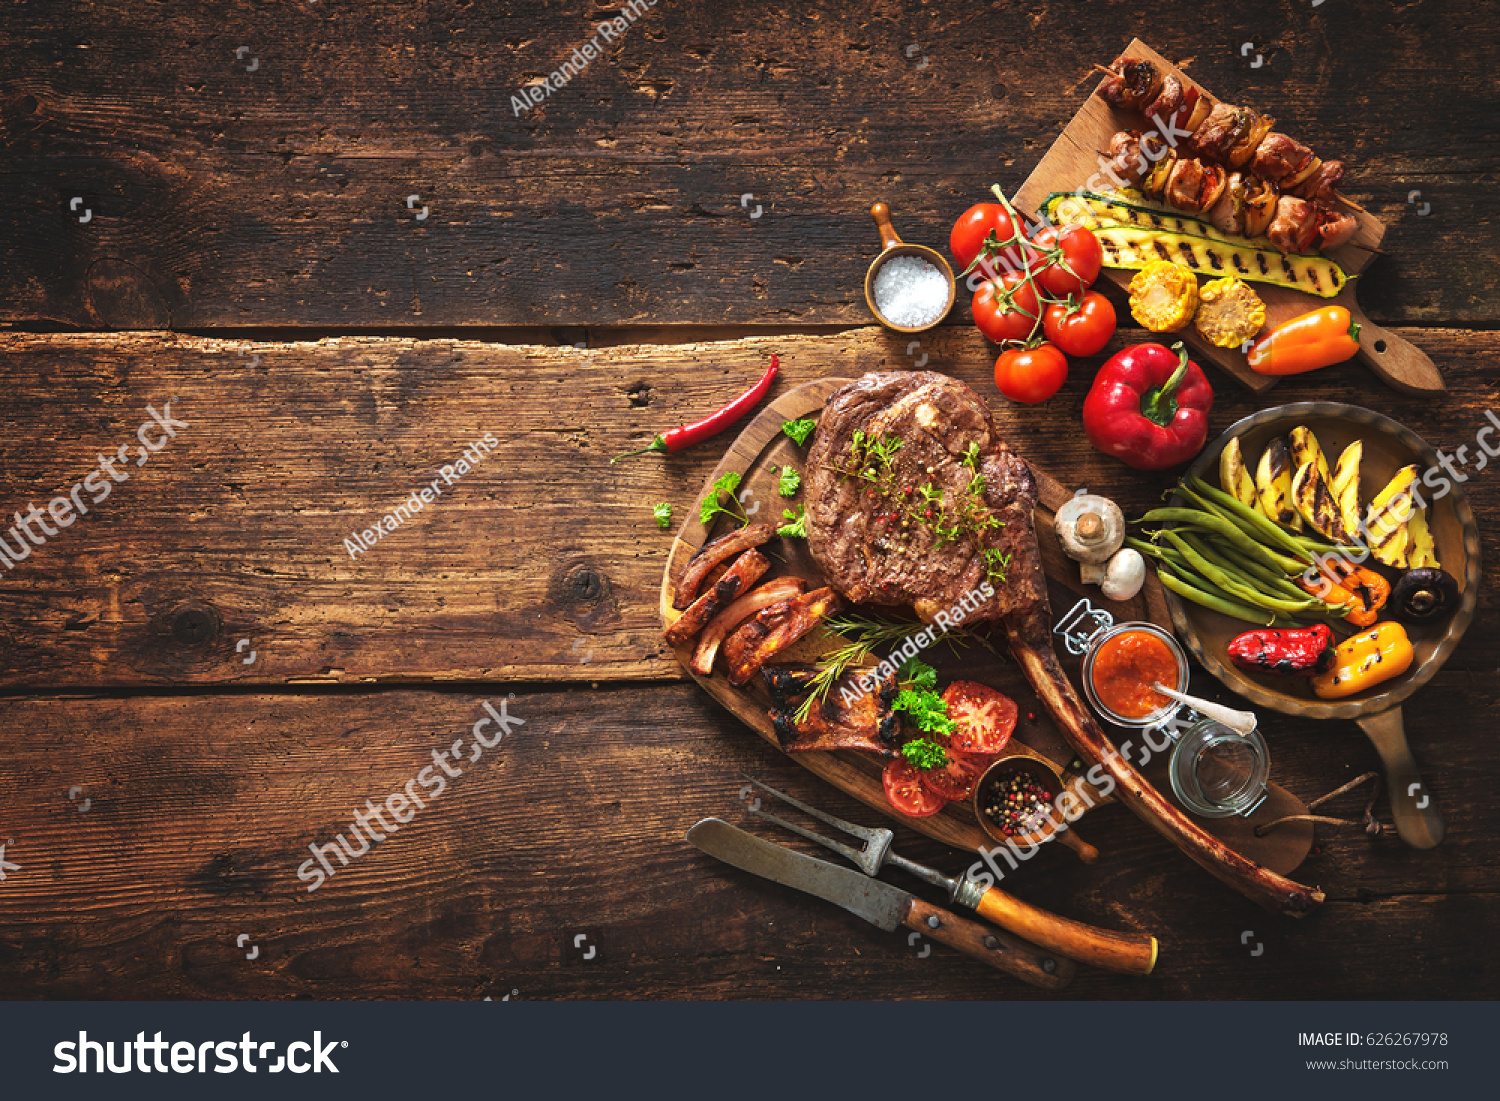 Grilled meat and vegetables on rustic wooden table #626267978